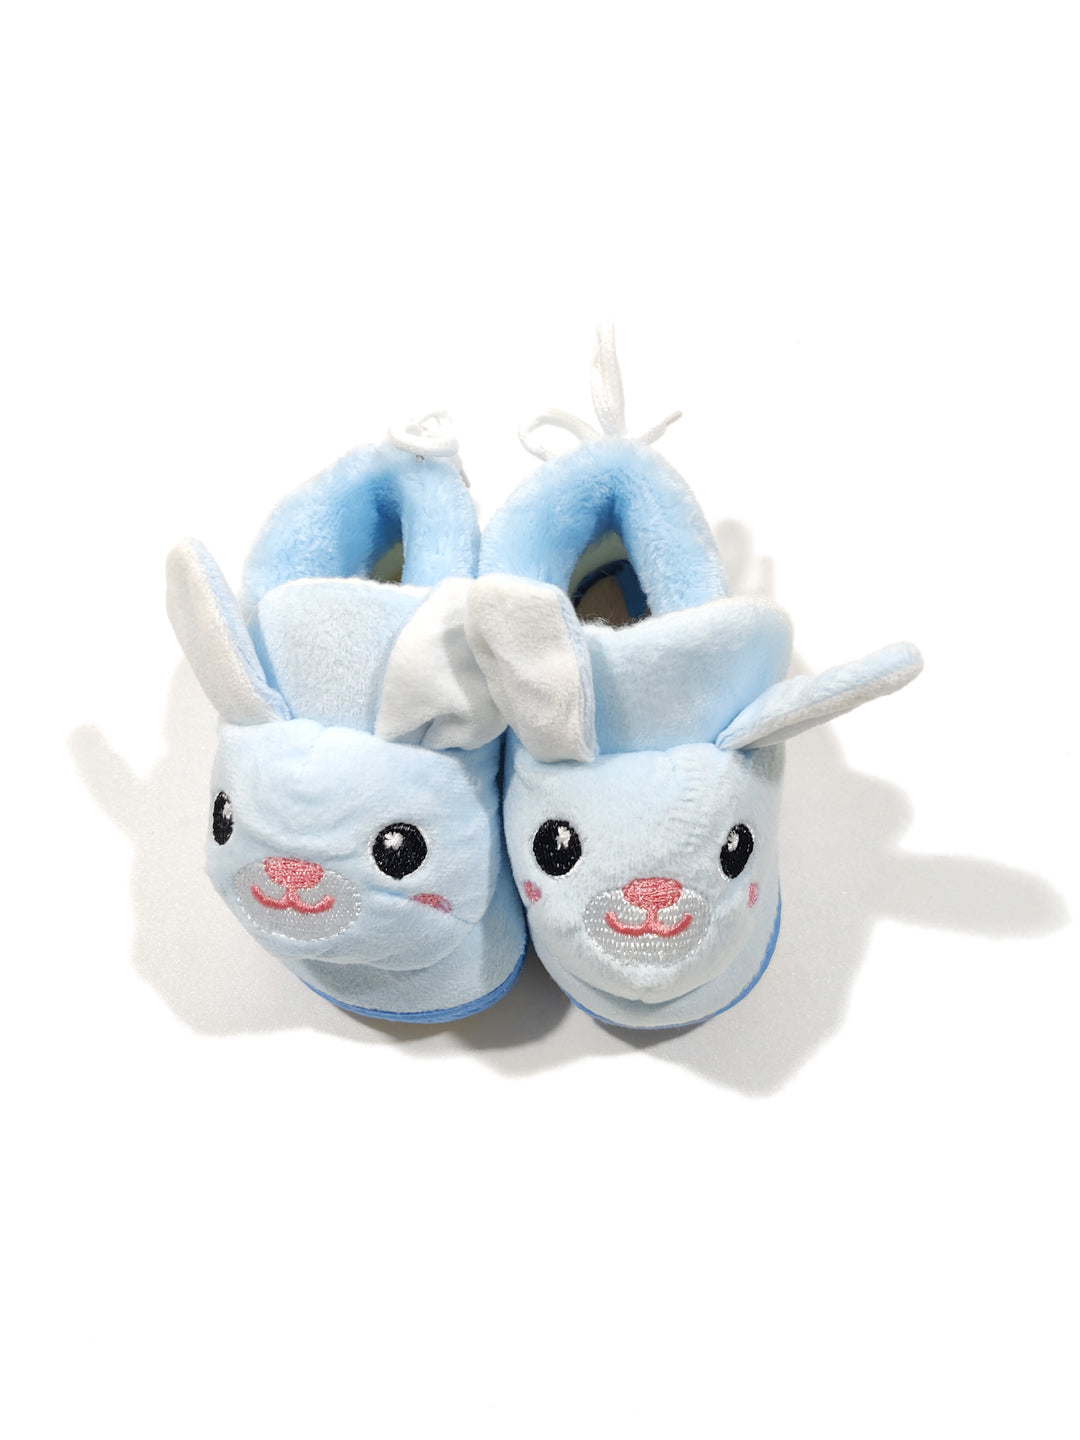 Footprints Soft First Walking Shoes For Unisex Baby Bootie with Rubber, Blue Rabit 6-9 Months